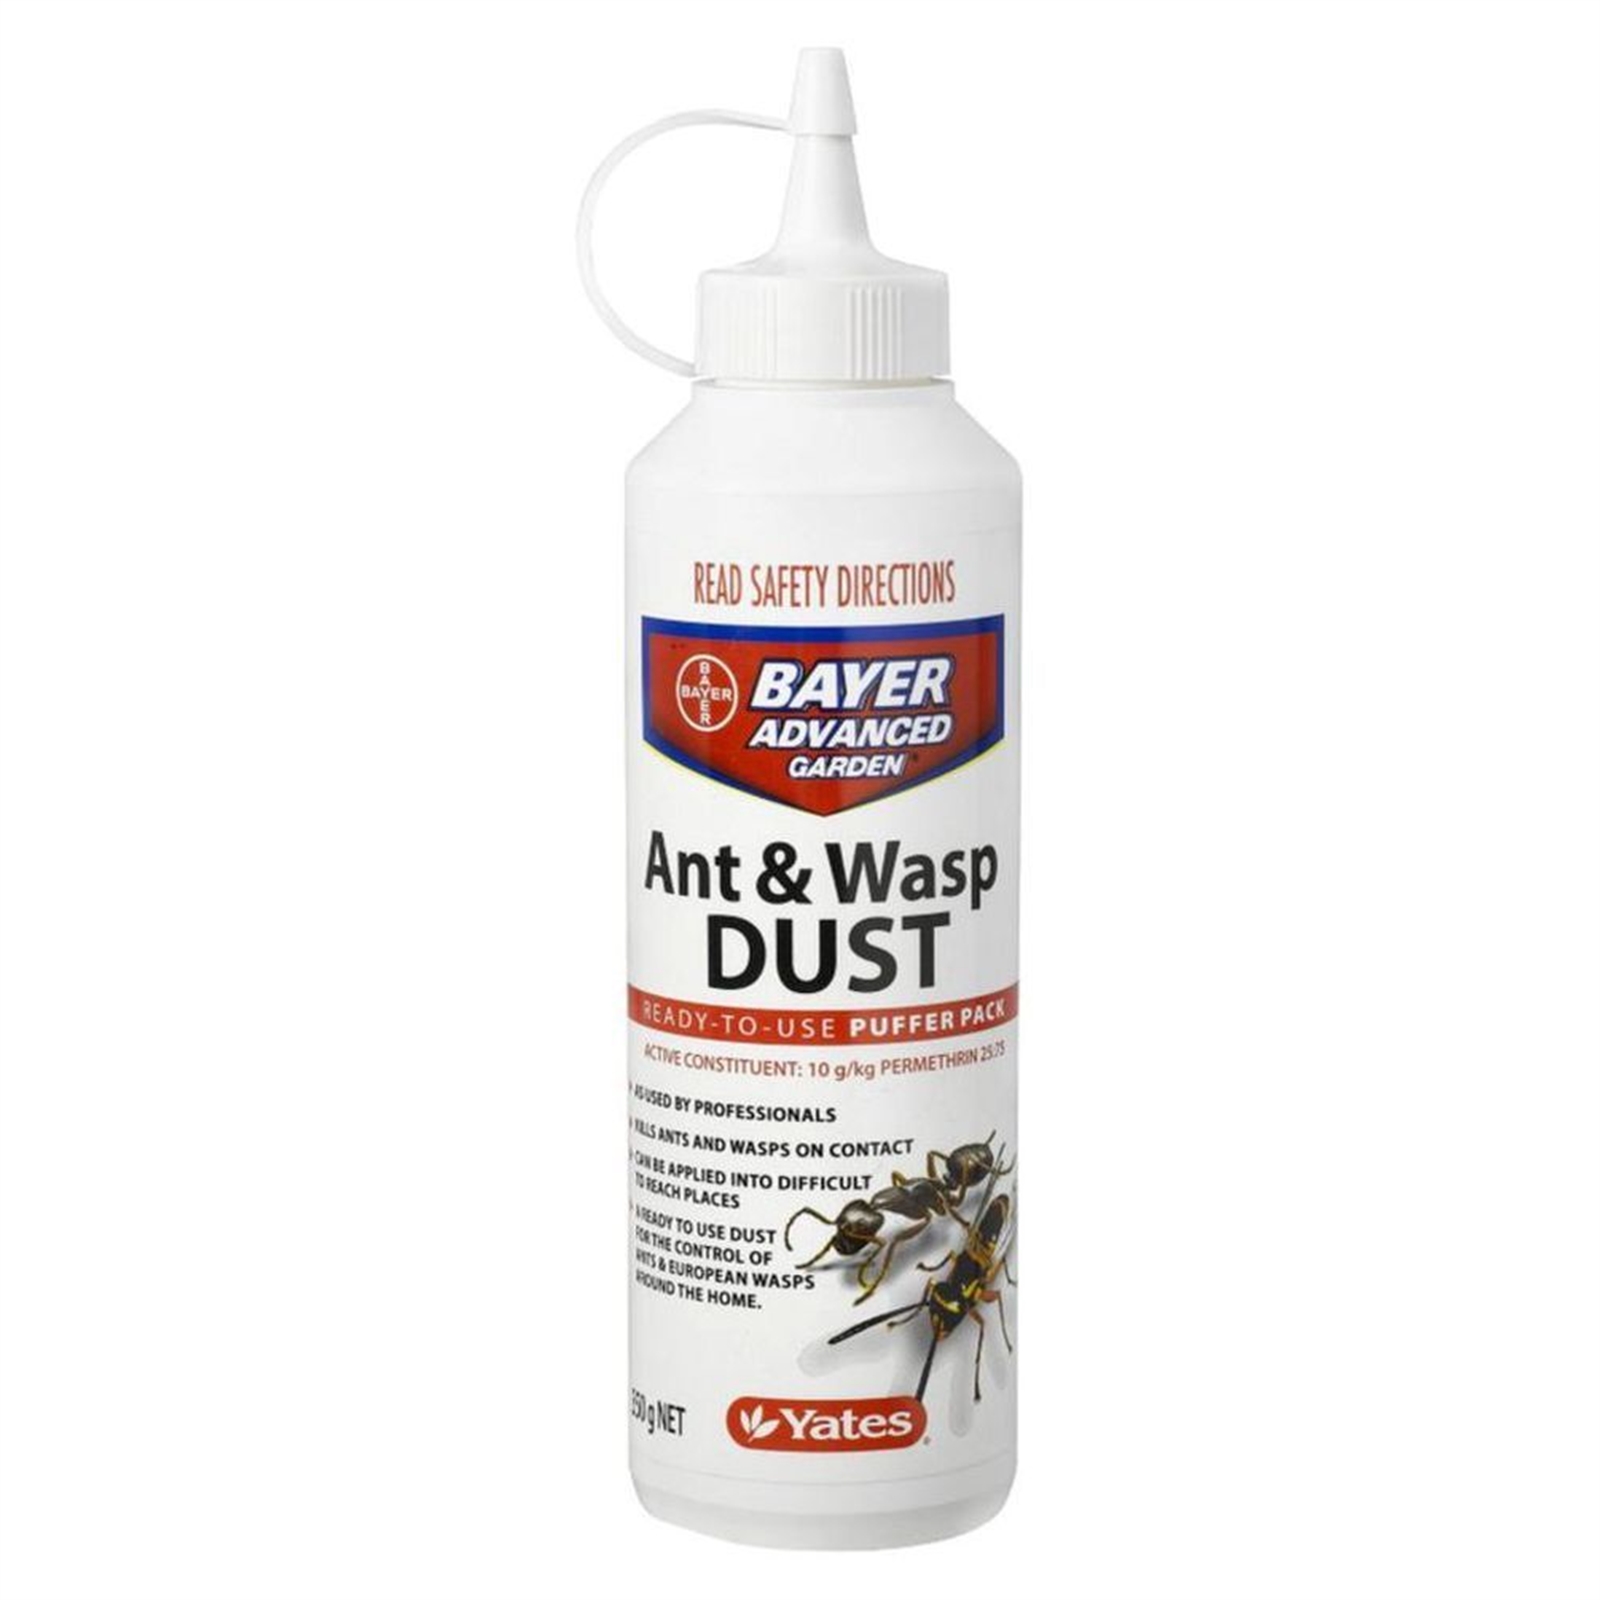 Bayer 350g Ant And Wasp Dust